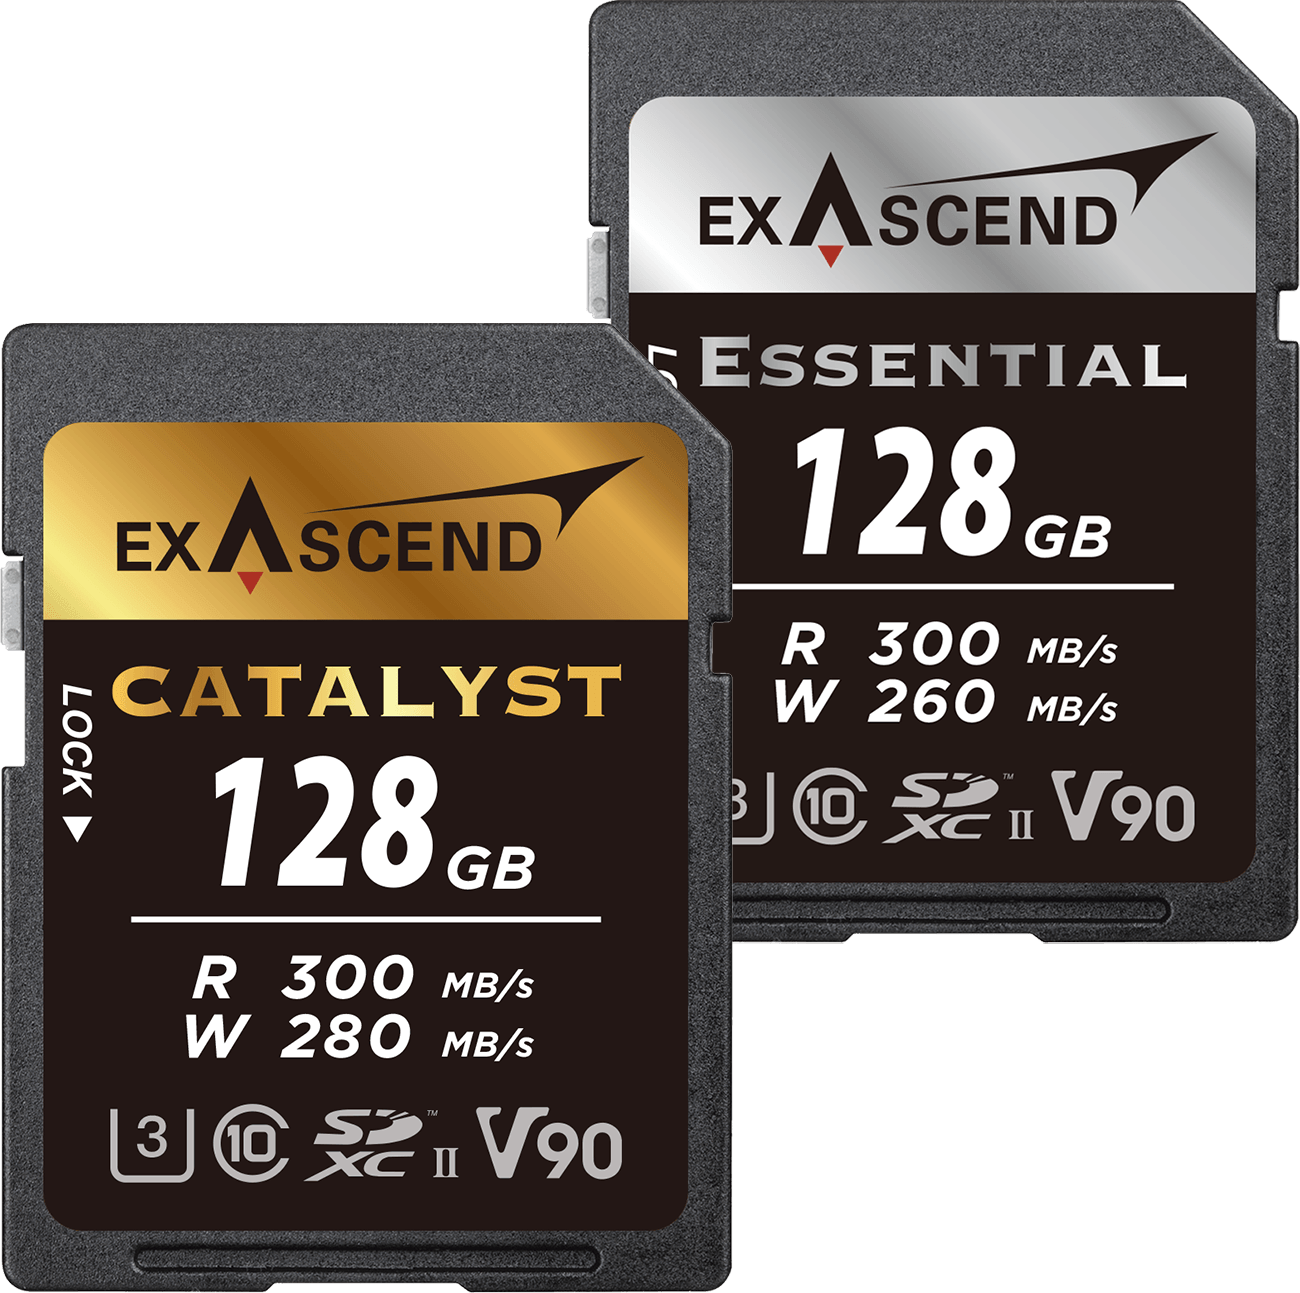 Image depicting Exascend's Catalyst and Essential SD cards (UHS-II, V90) 128 GB.